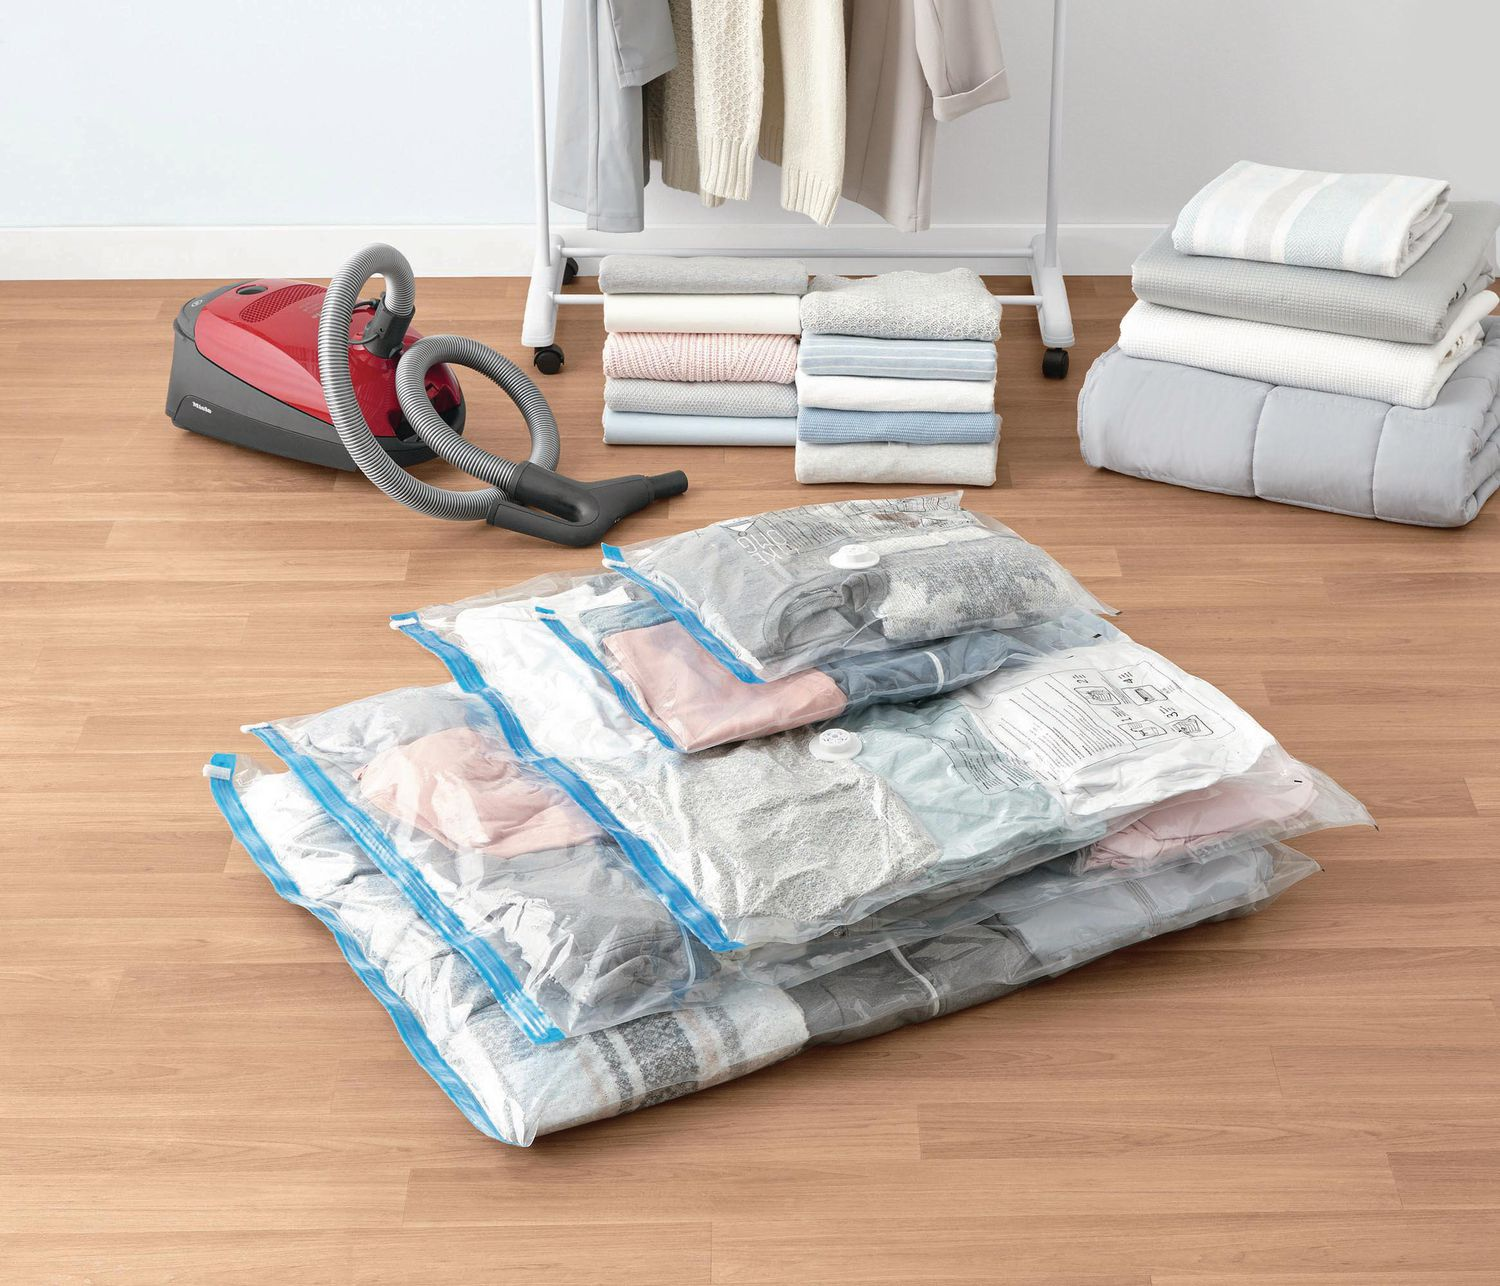 vacuum bag with sheets inside depicting how to store sheets in a home